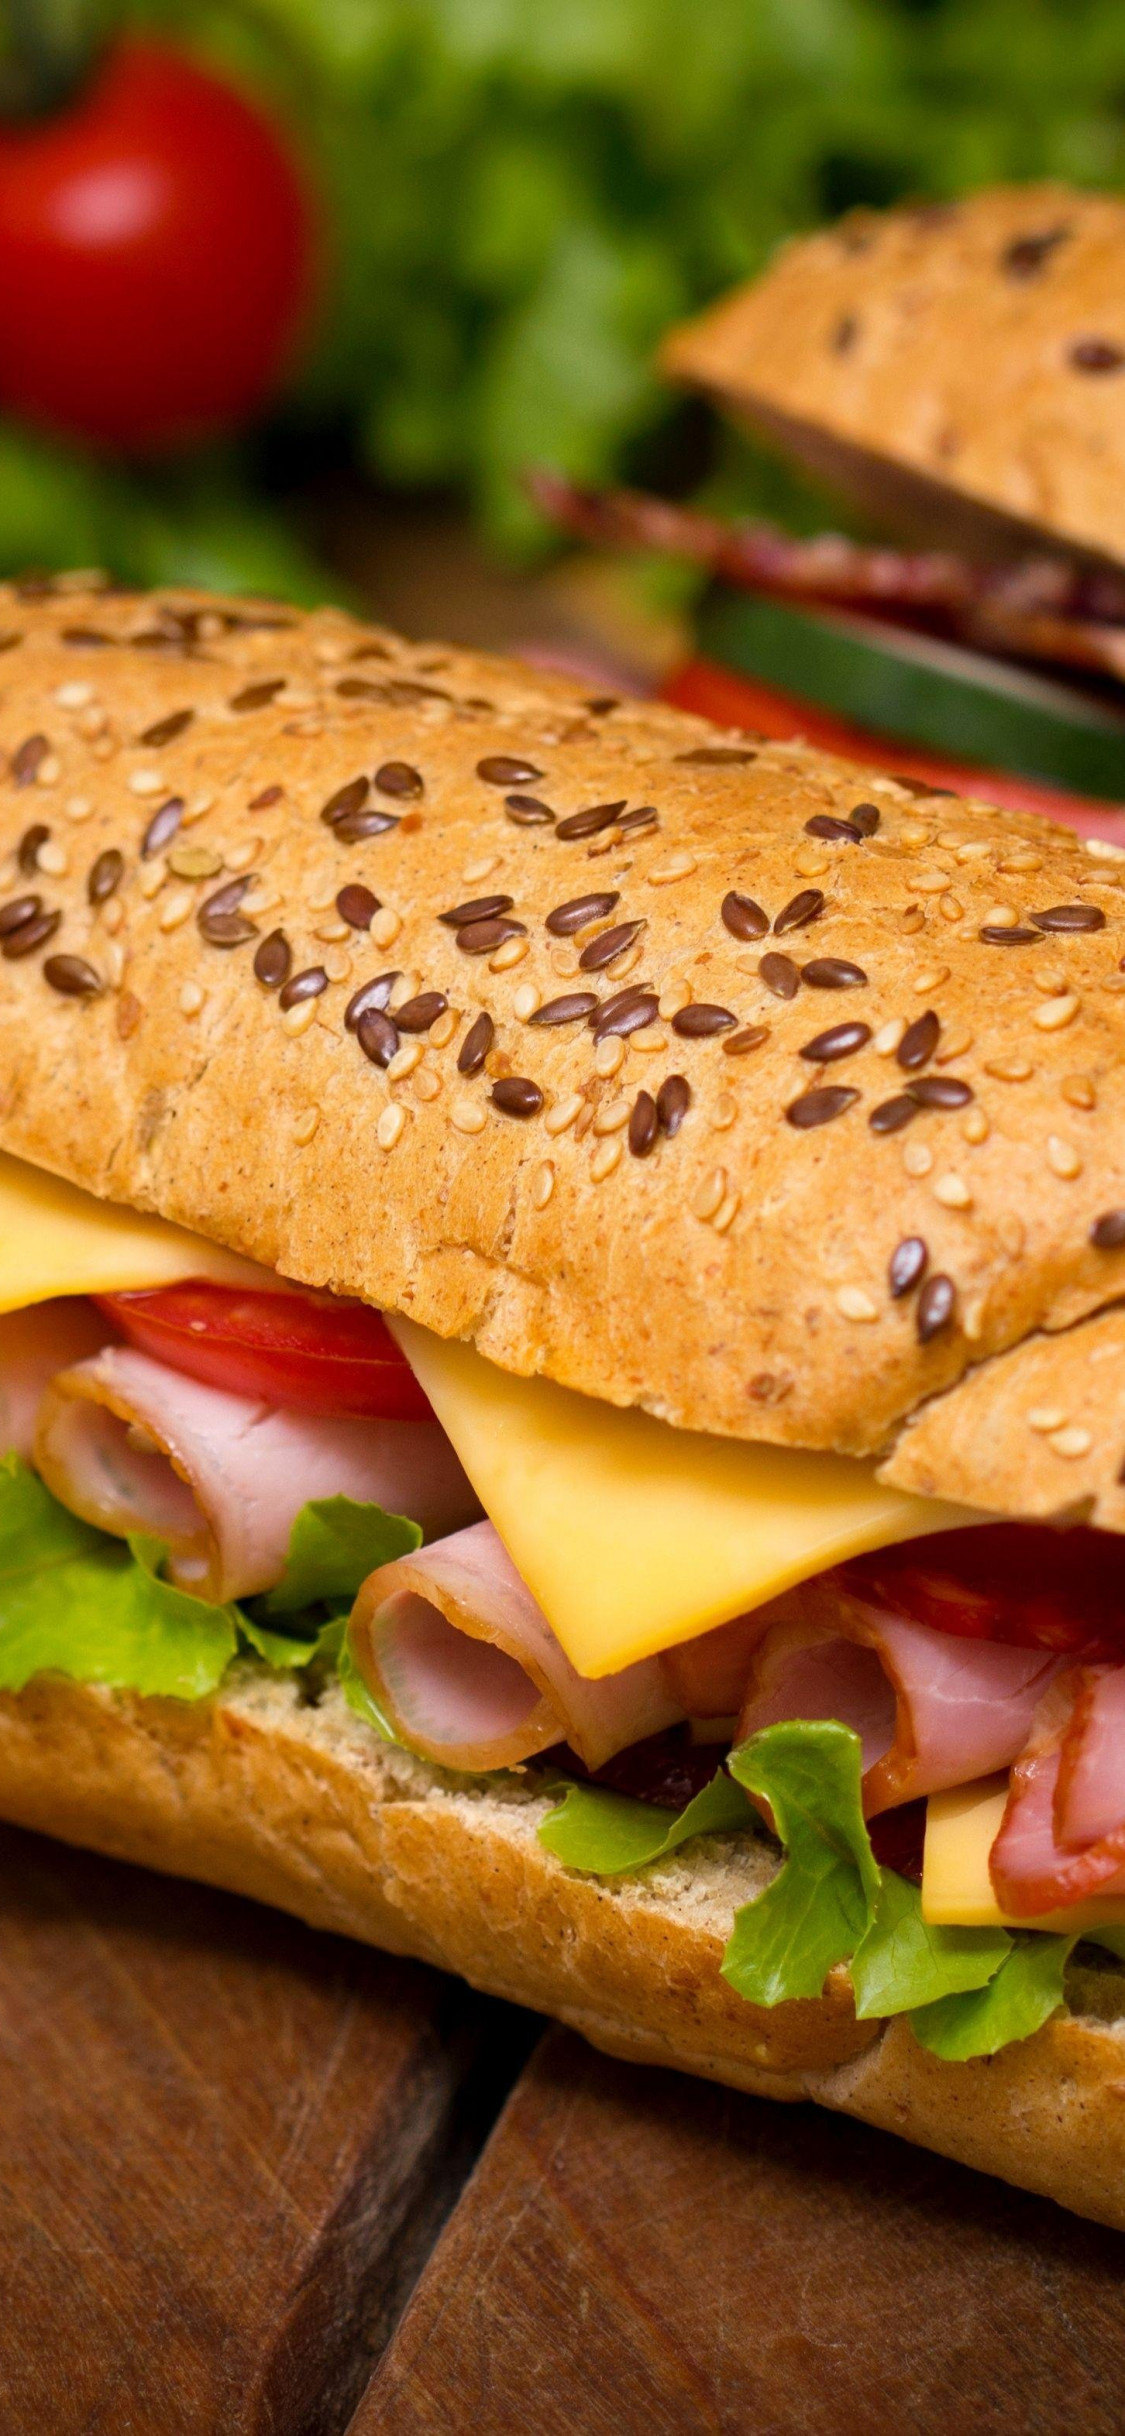 Sandwich: The distinct regional flavors, Local ingredients and culinary traditions. 1130x2440 HD Wallpaper.